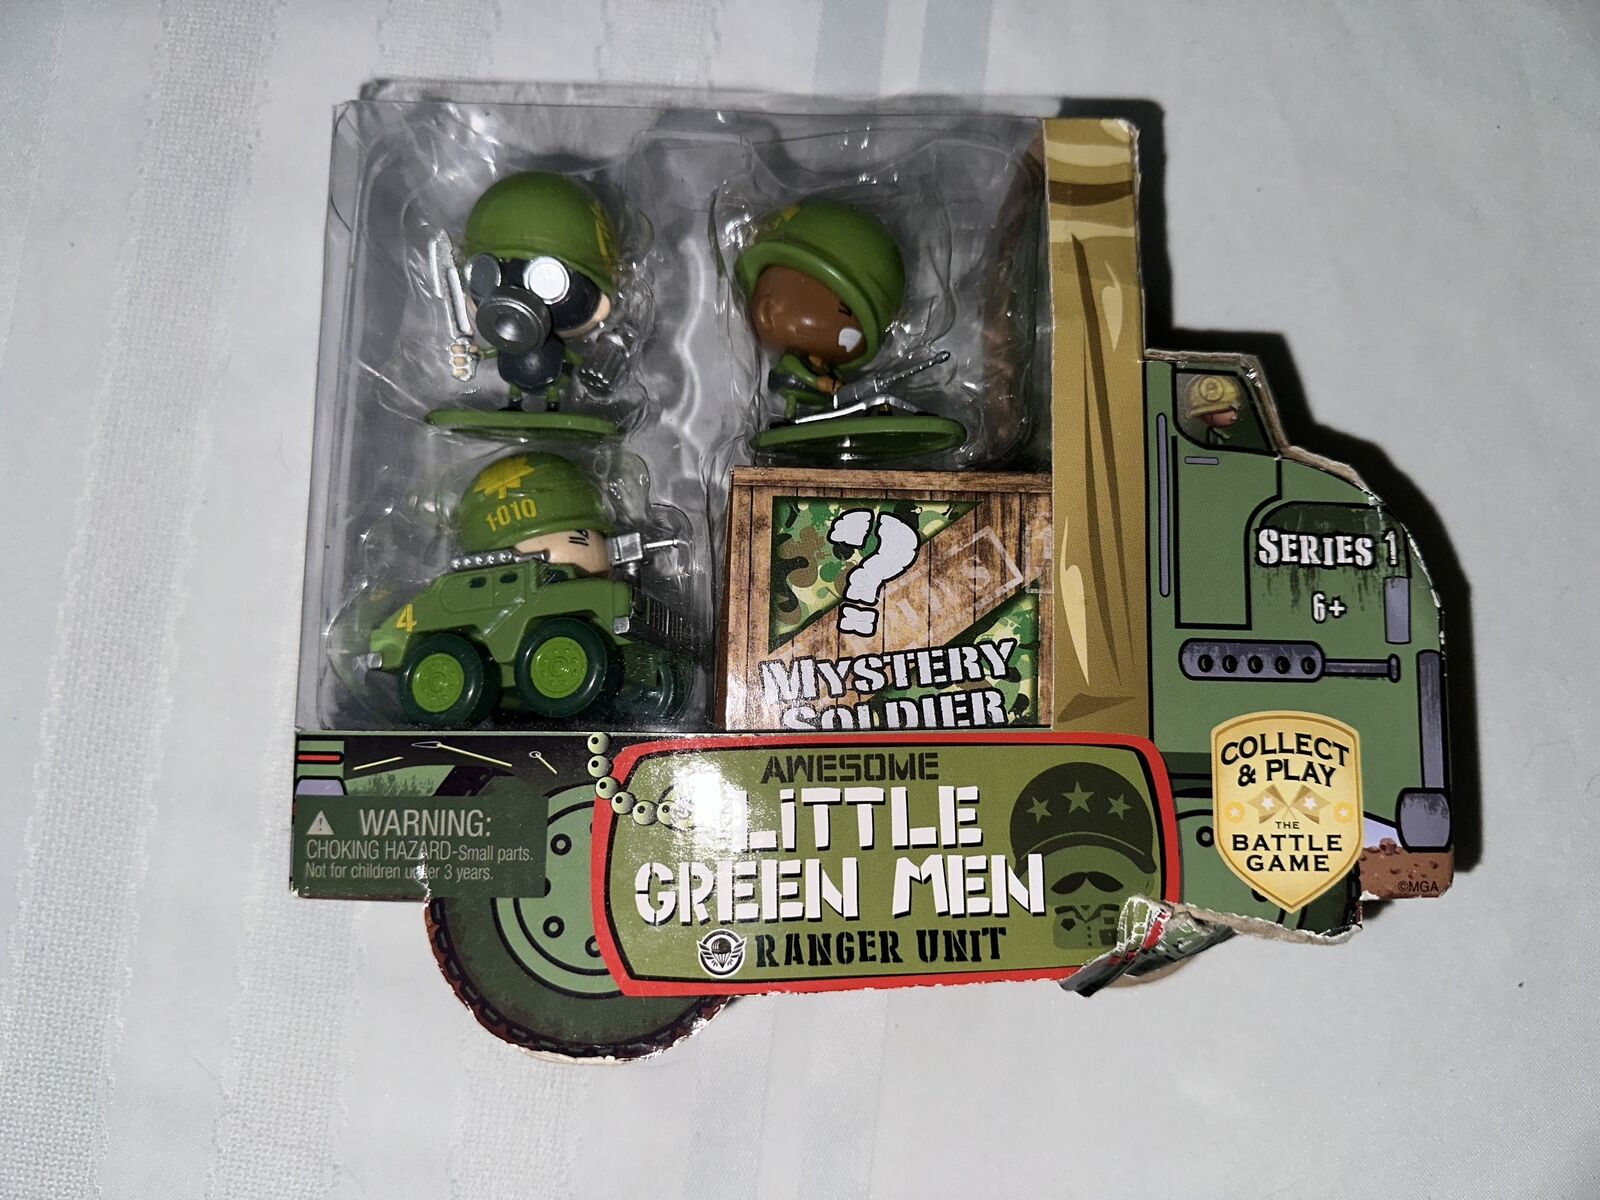 AWESOME LITTLE GREEN MEN RANGER UNIT SOLDIERS SERIES ONE NEW IN BOX